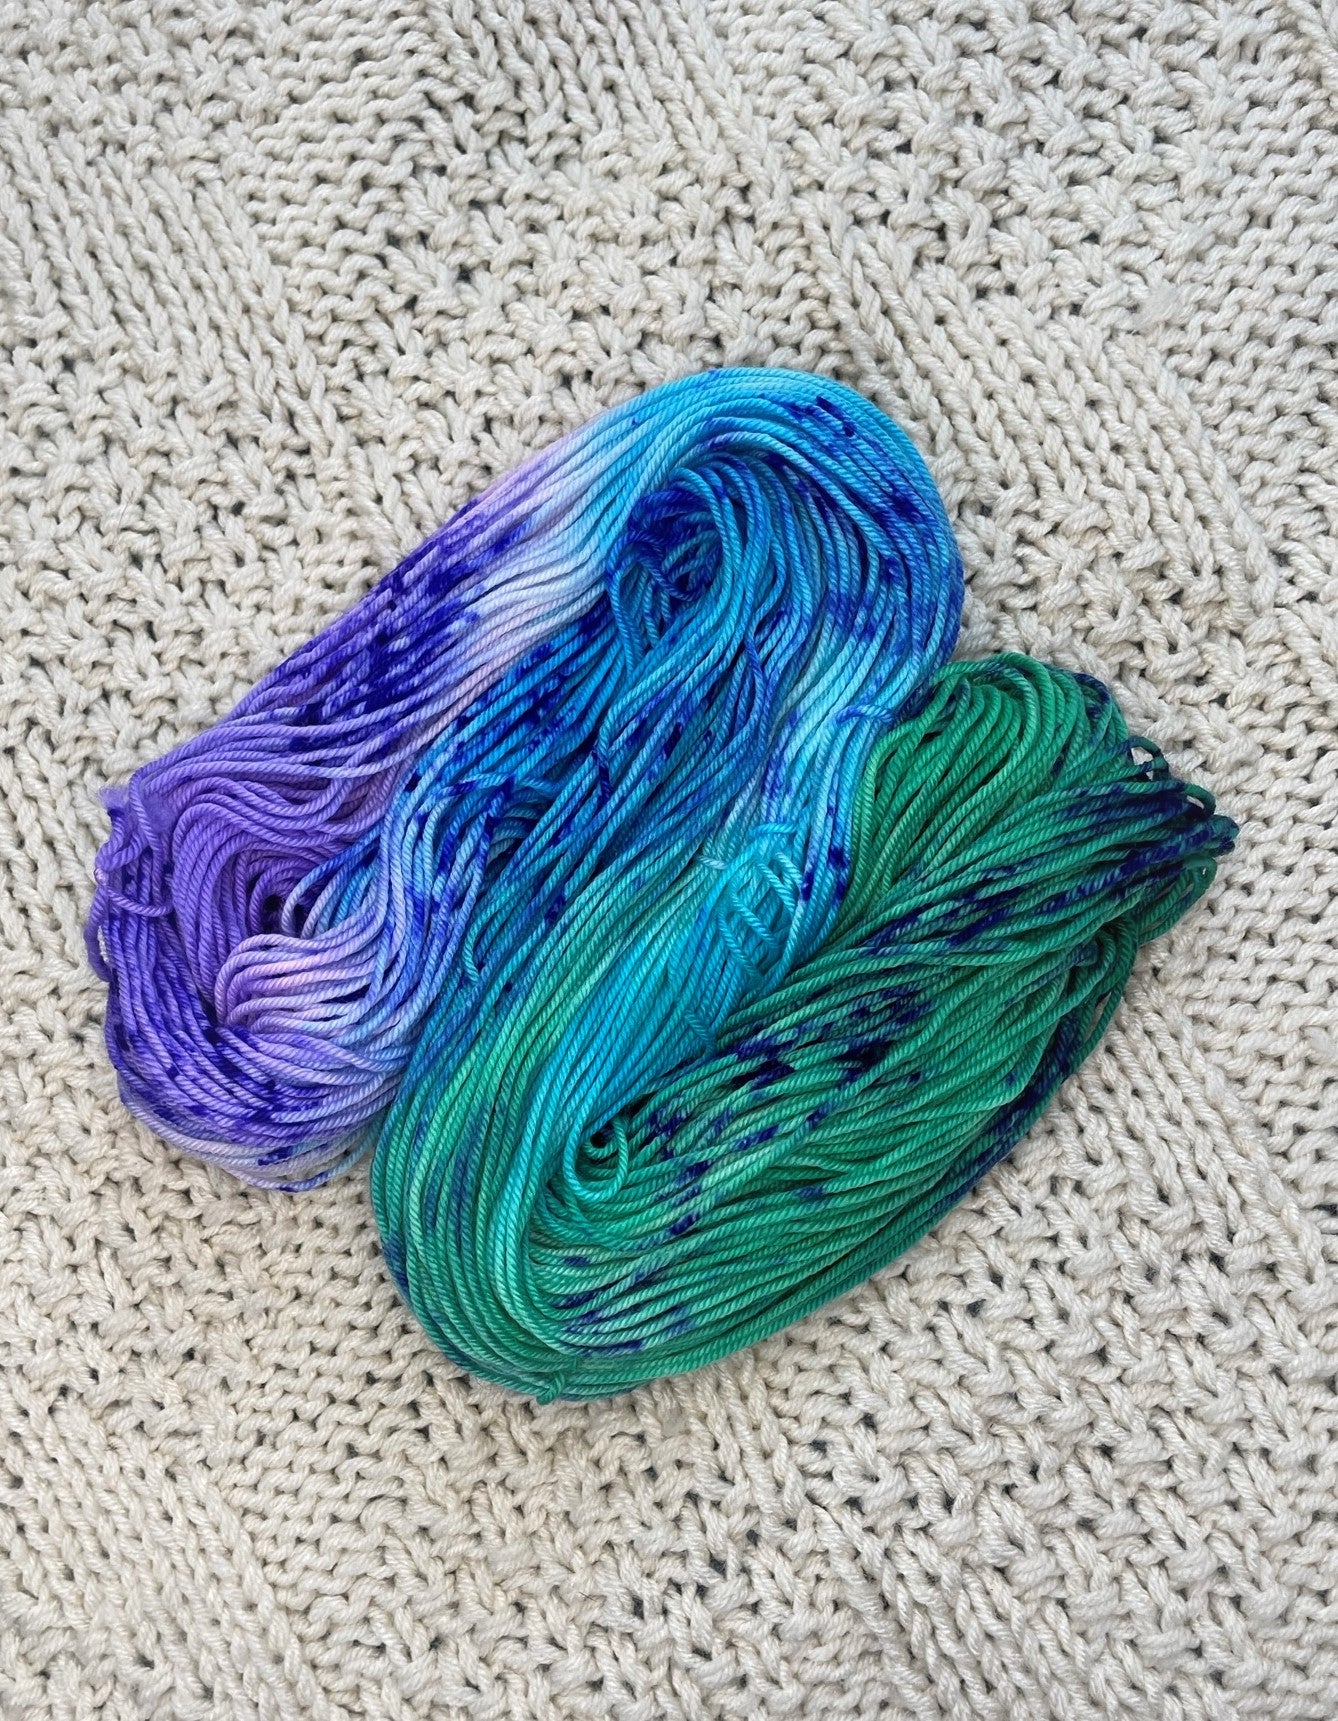 Ping Pong - Hand Dyed SW DK Exxtra 100% Merino Yarn, 246 Yards (225 Meters)